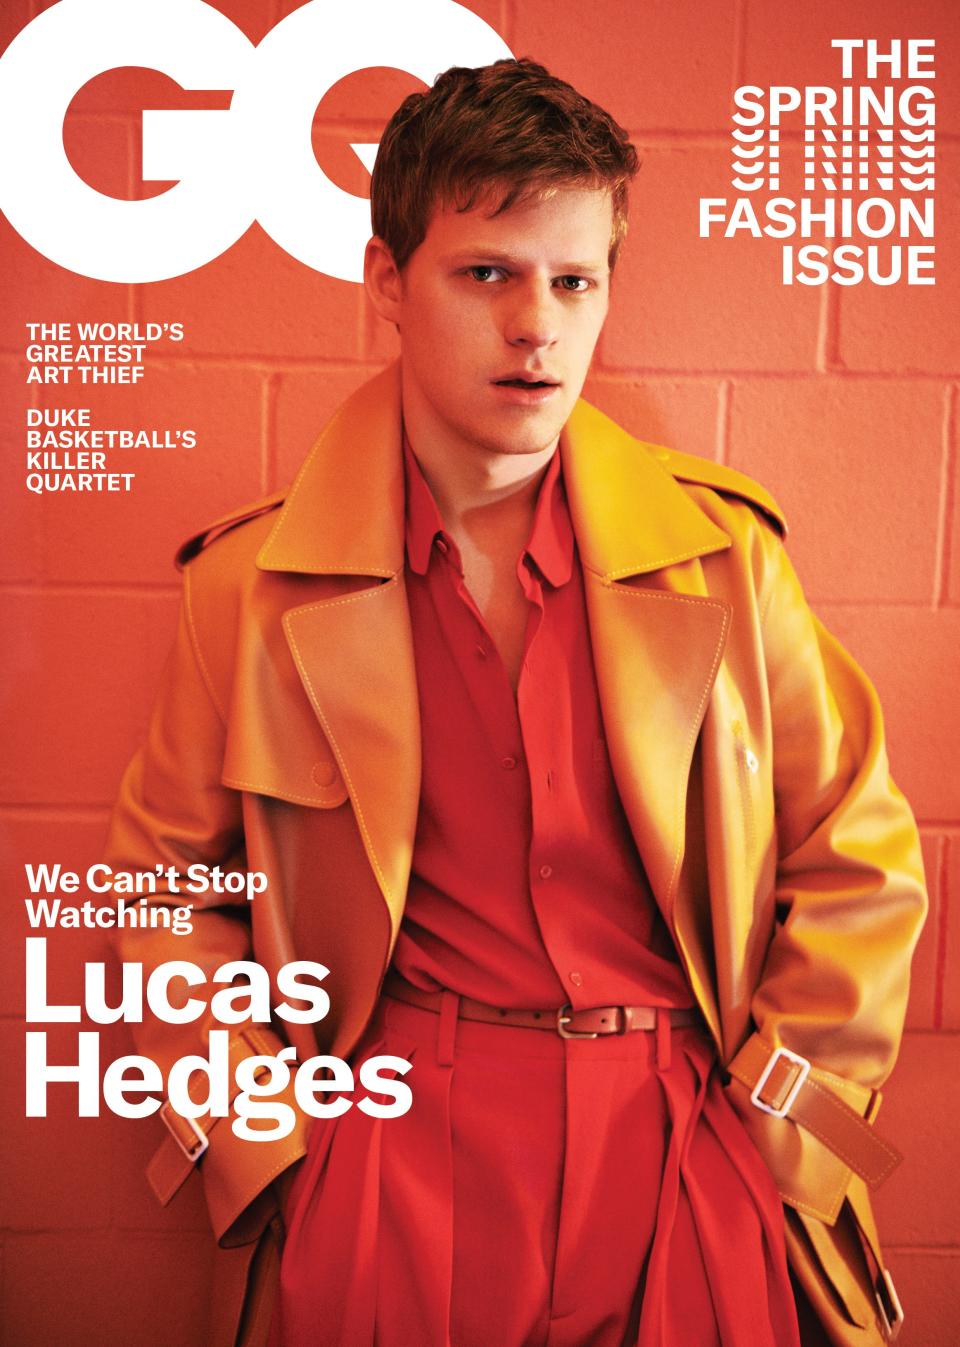 Your coffee table could use some style. Click here to subscribe to GQ.